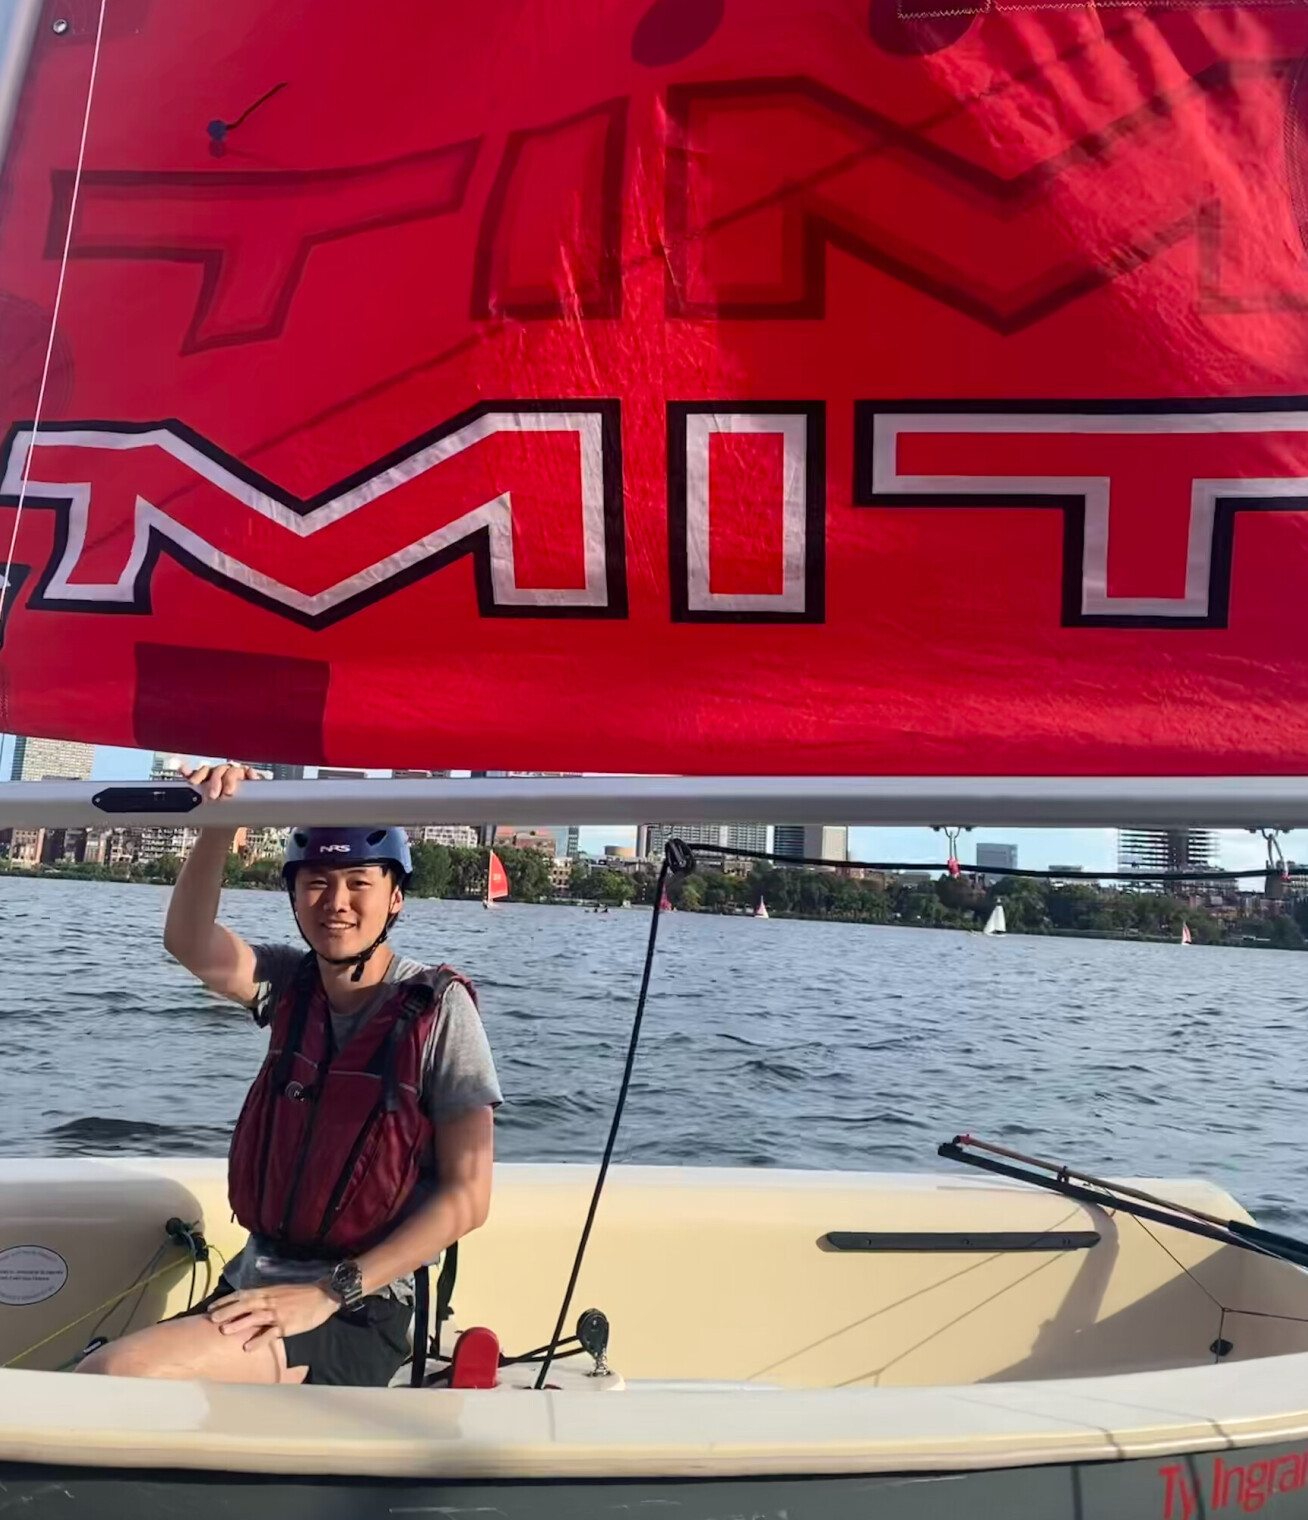 Ethan in an MIT-branded sailing boat